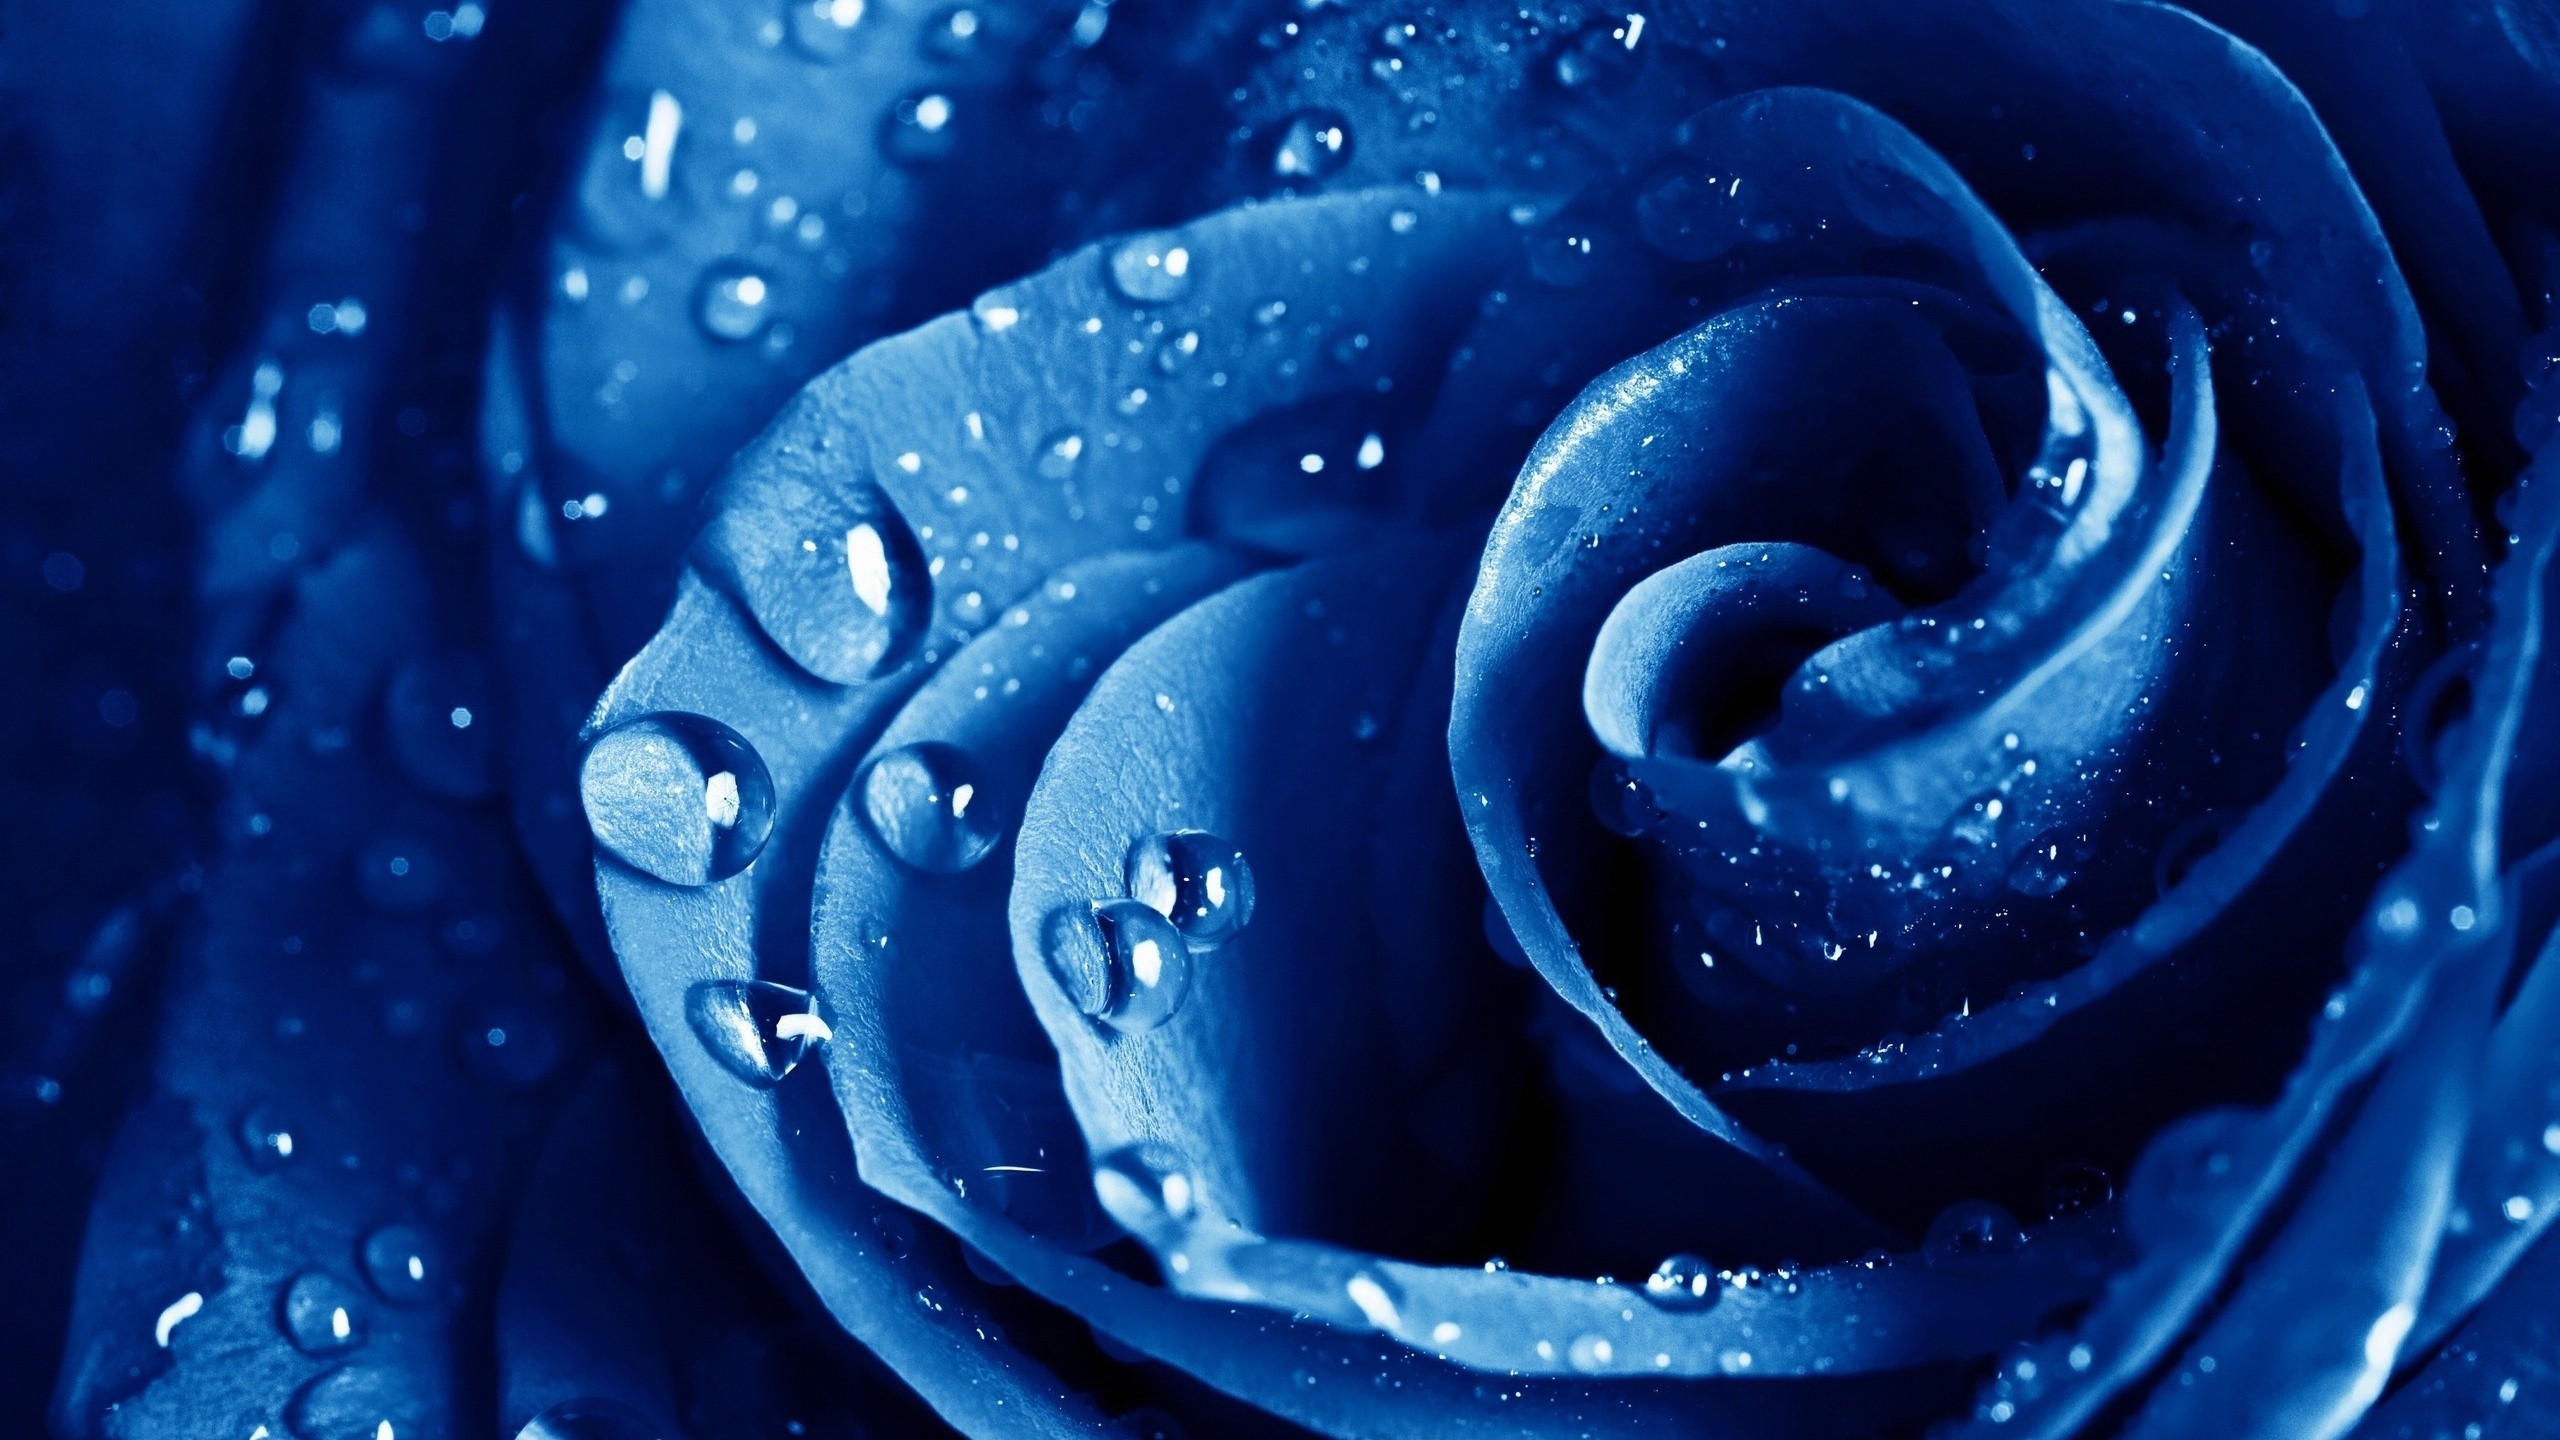 Blue Flowers Background (49+ images)